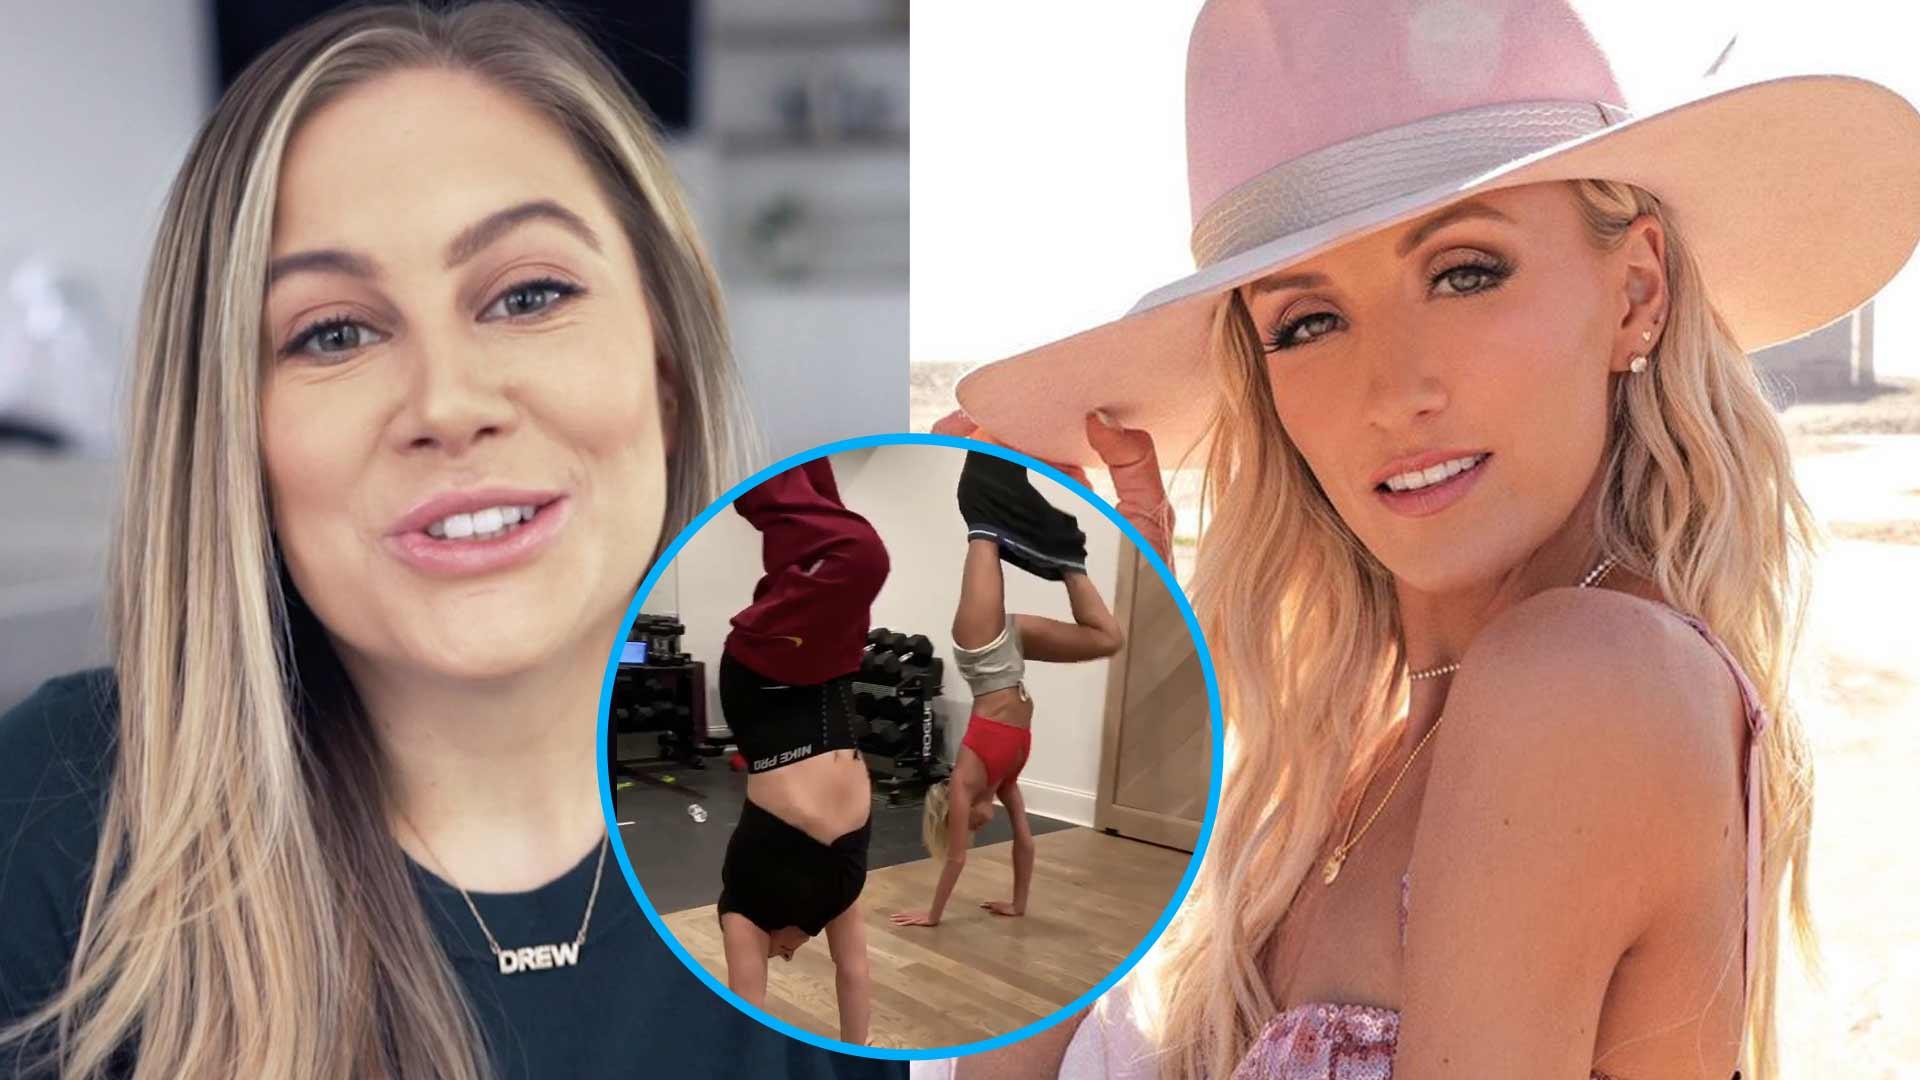 Olympic Gymnast Nastia Liukin Crushes Shawn Johnson In Race To Take Their Pants Off